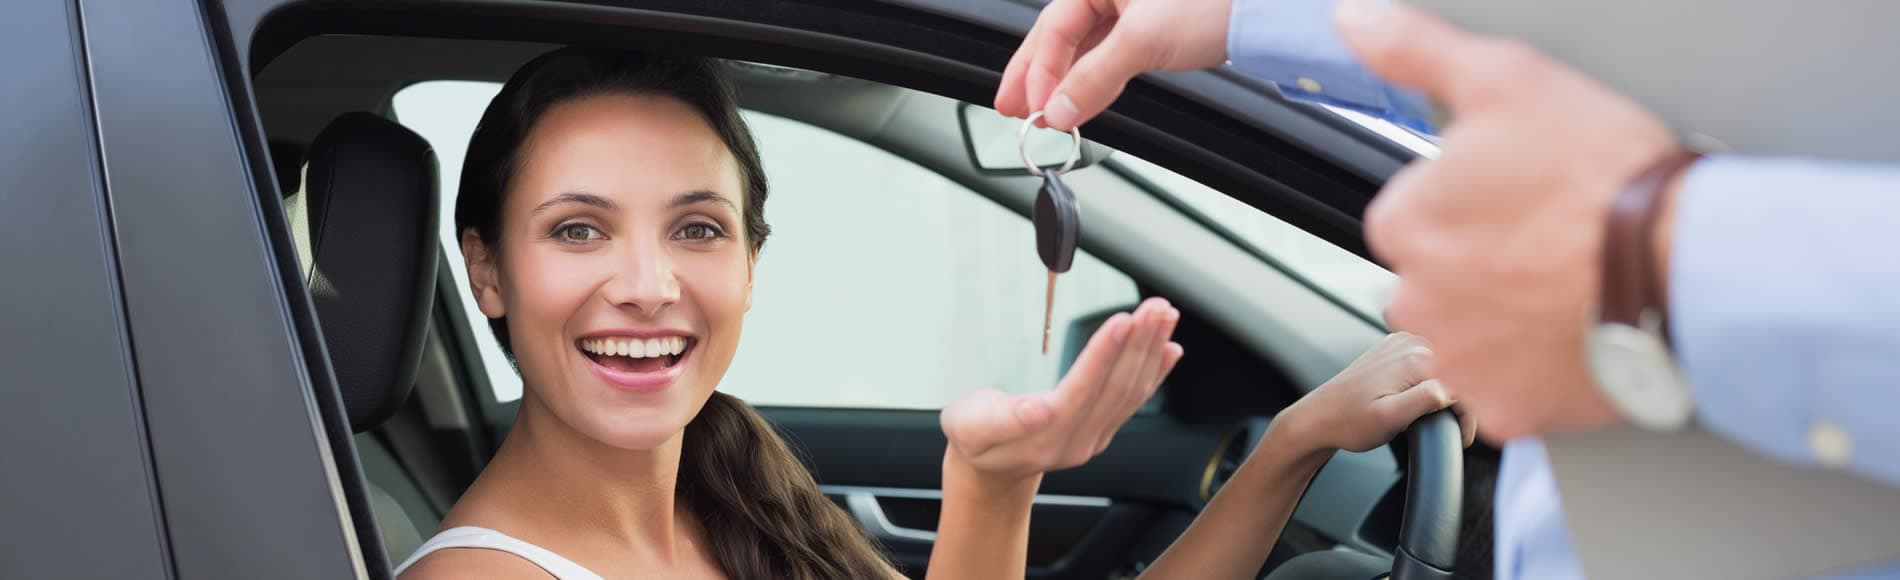 Man handing over the key to a new car to a young woman sitting in the driver's seat